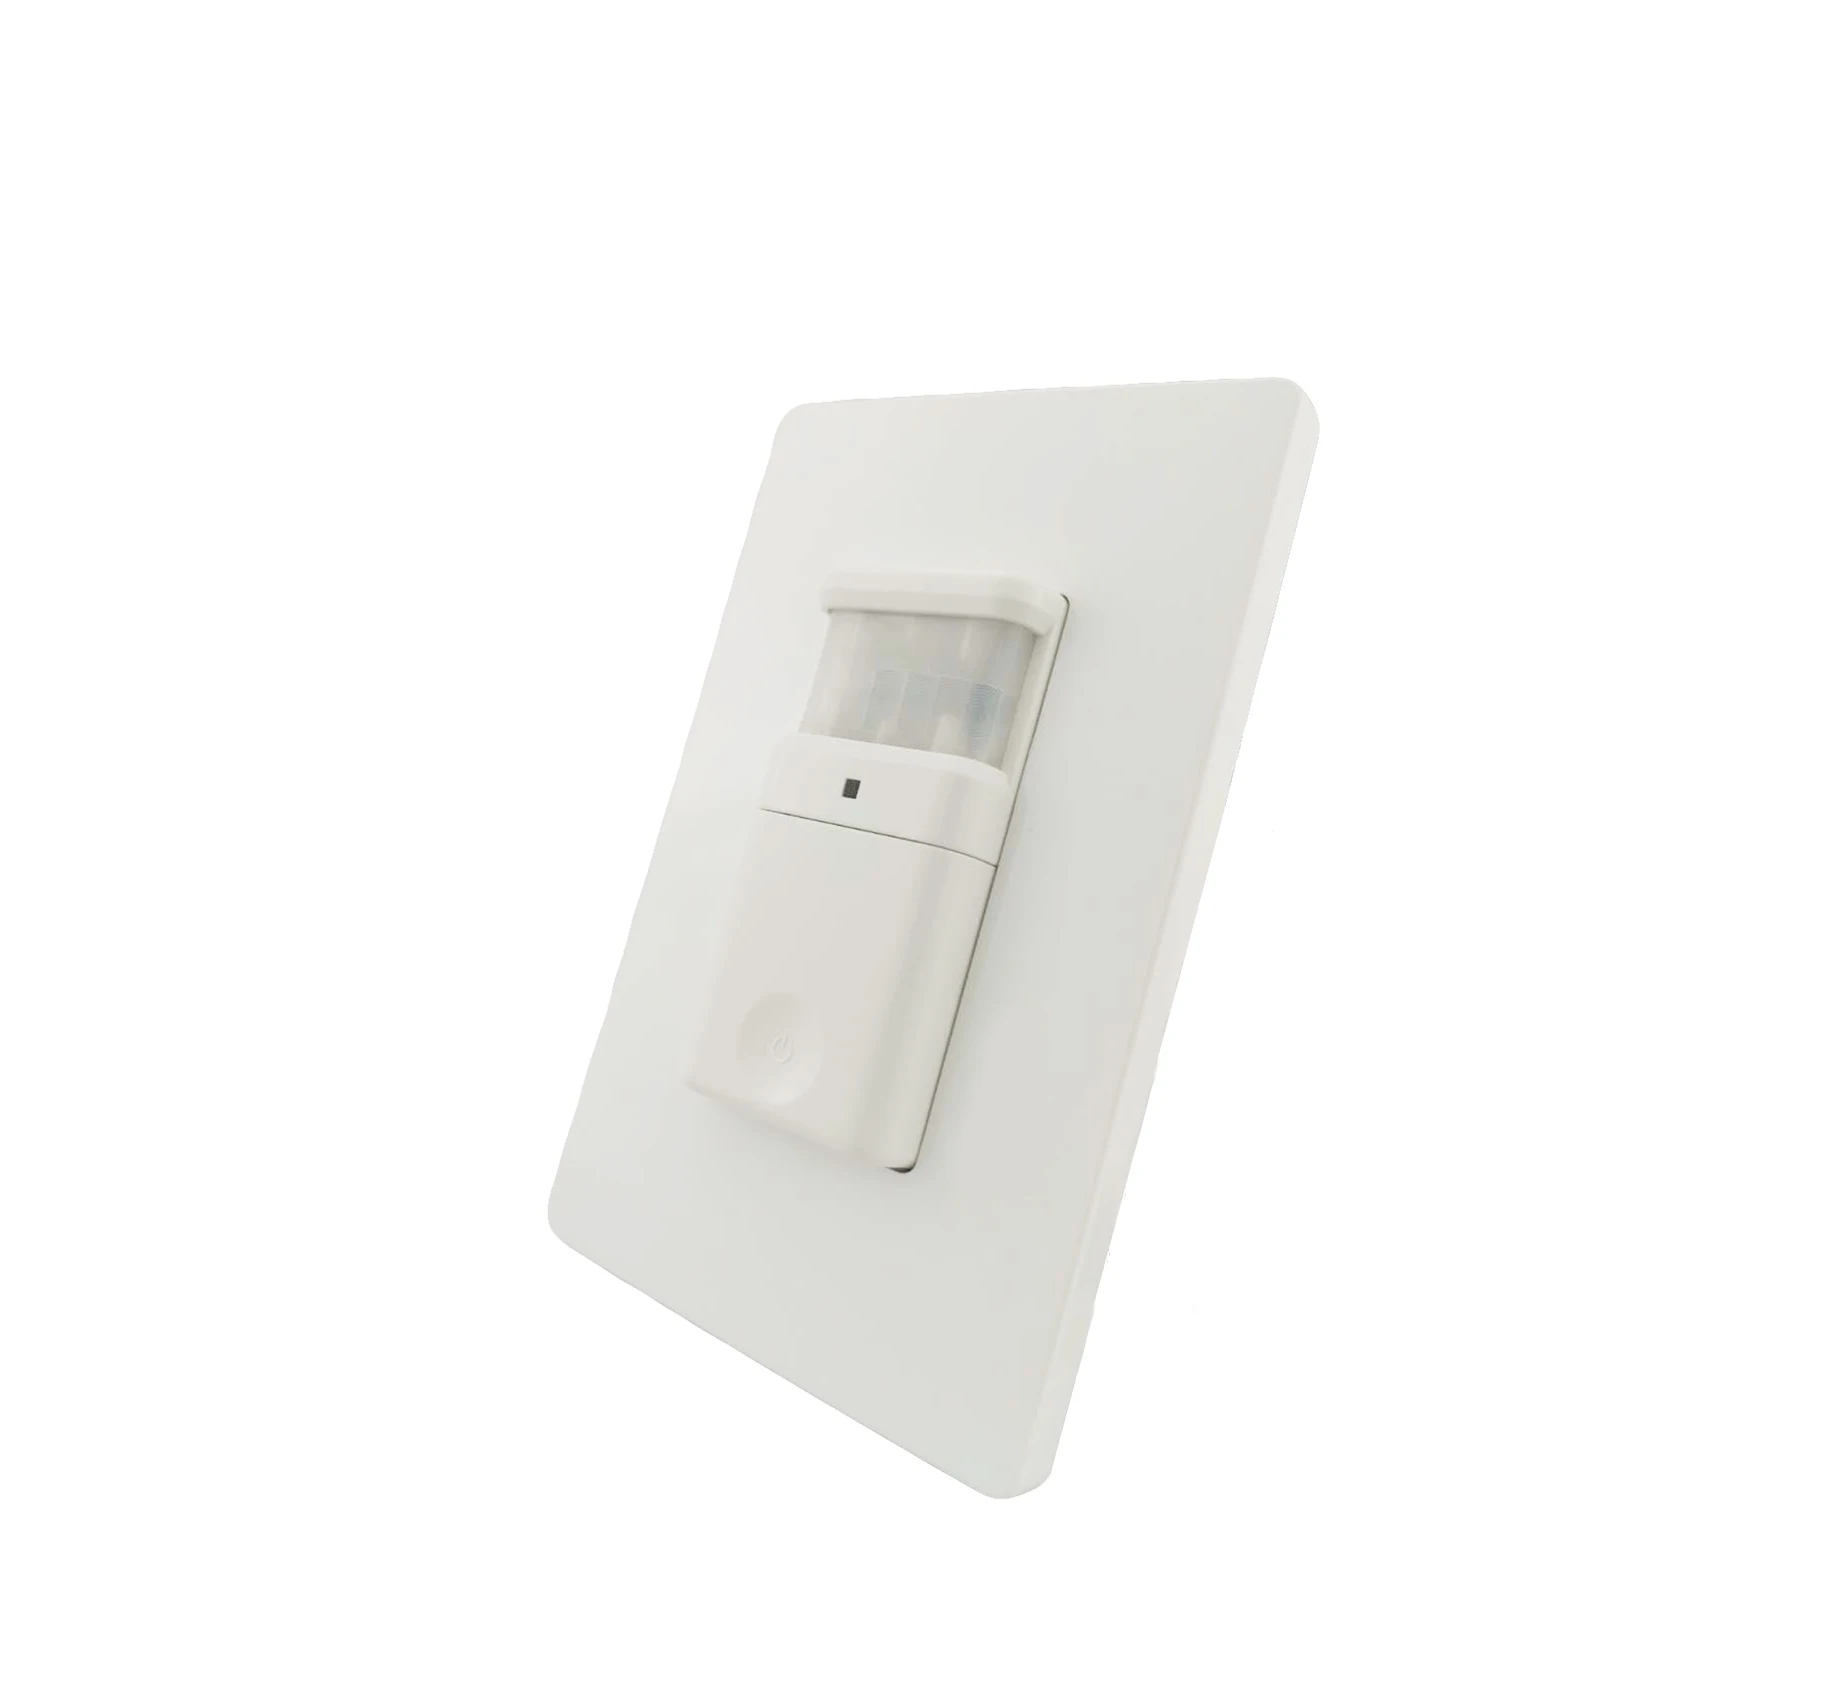 UL listed American Standard durable 15A Occupancy sensor switch wall led light switch